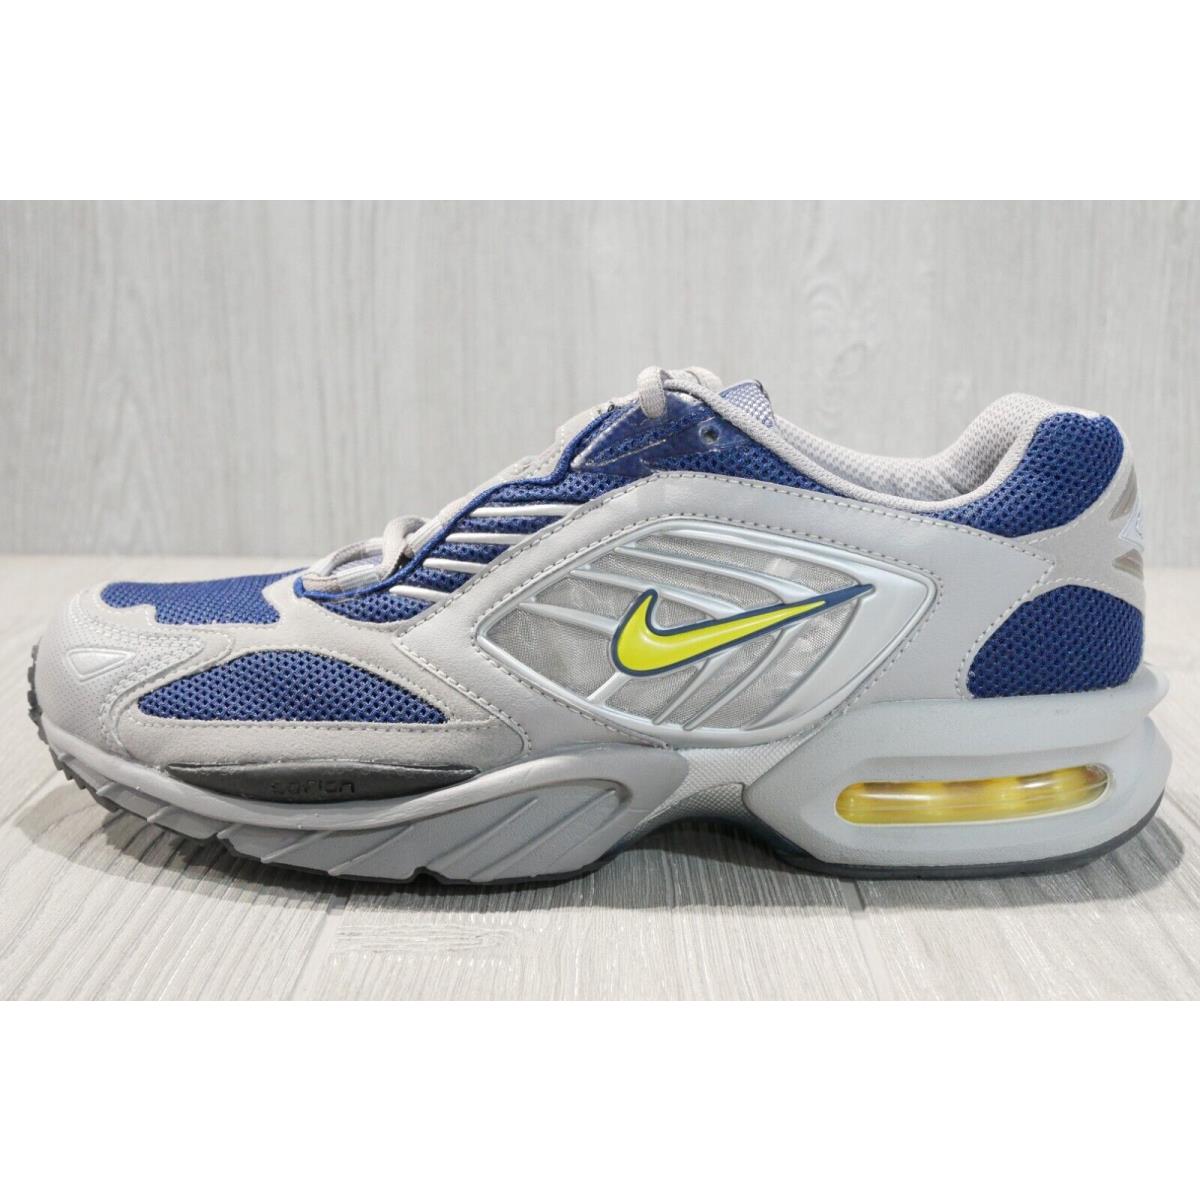 puppy beneden een keer Vintage Nike Air Max Moto Grey Running Shoes 2002 Mens Size 11.5 Oss |  883212104830 - Nike shoes Air Max - grey | SporTipTop